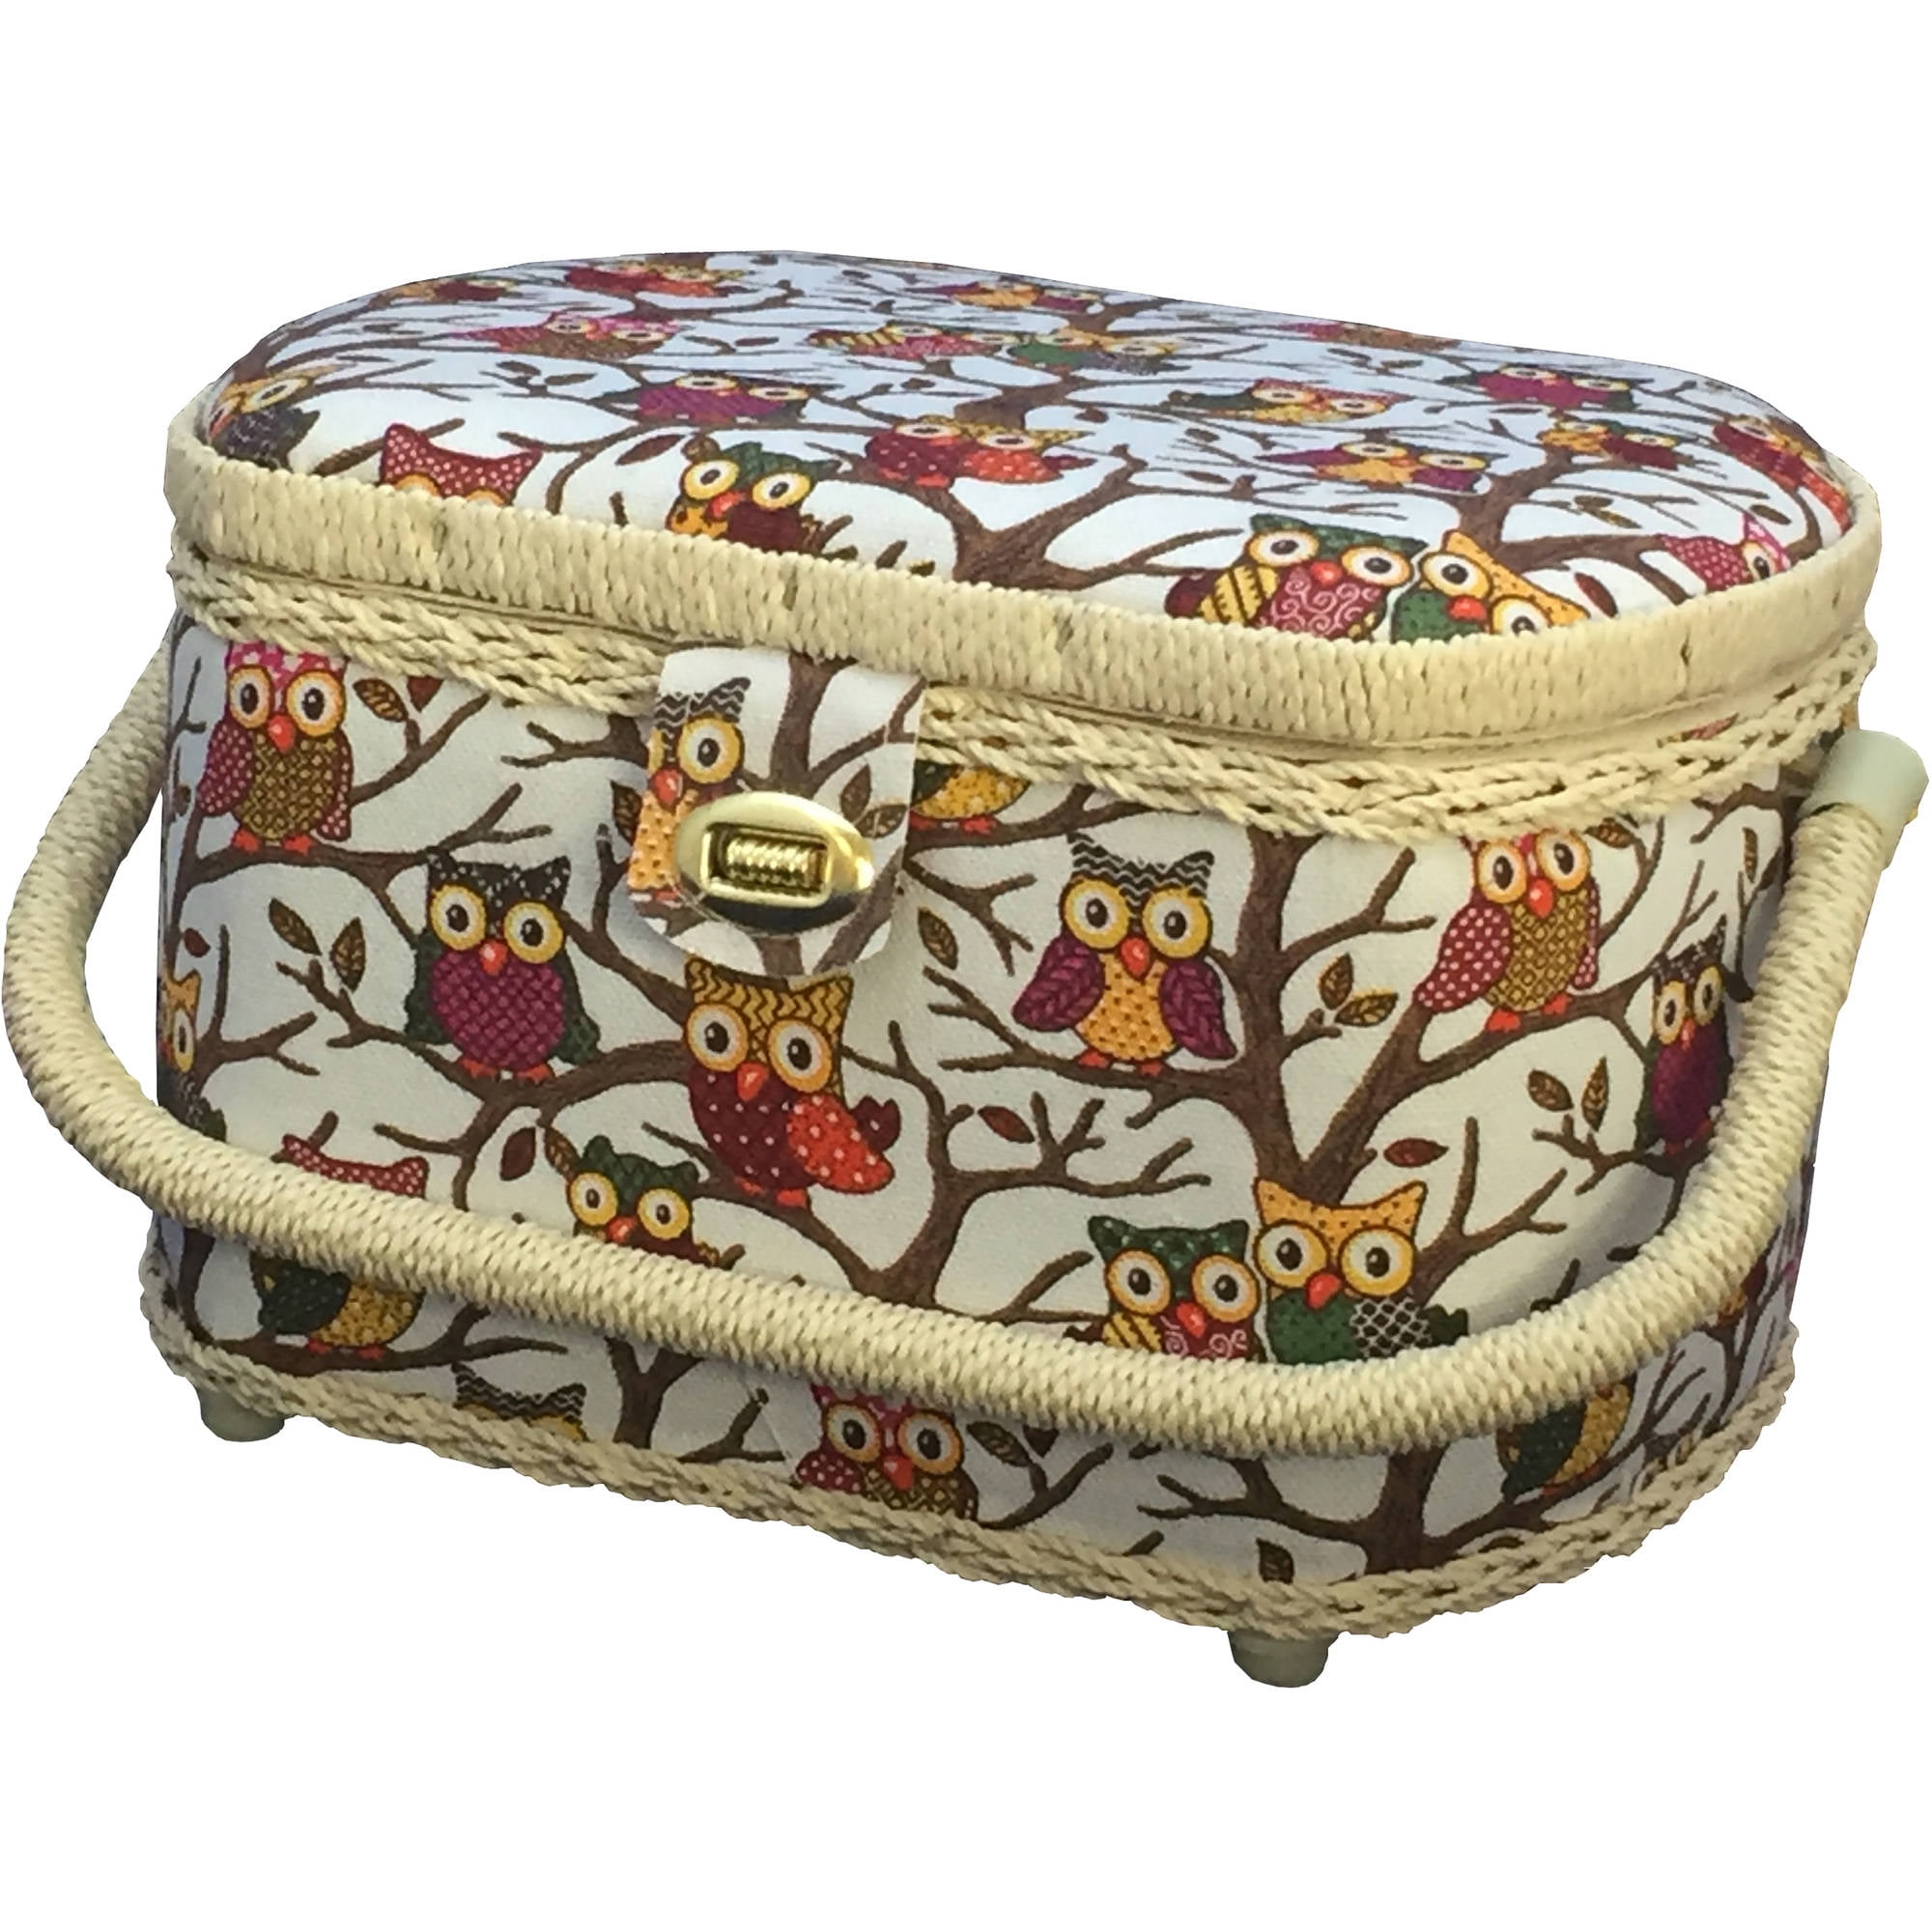 Michley FS-096 Owl-Patterned Sewing Basket With 41-Piece Sewing Kit - Walma...